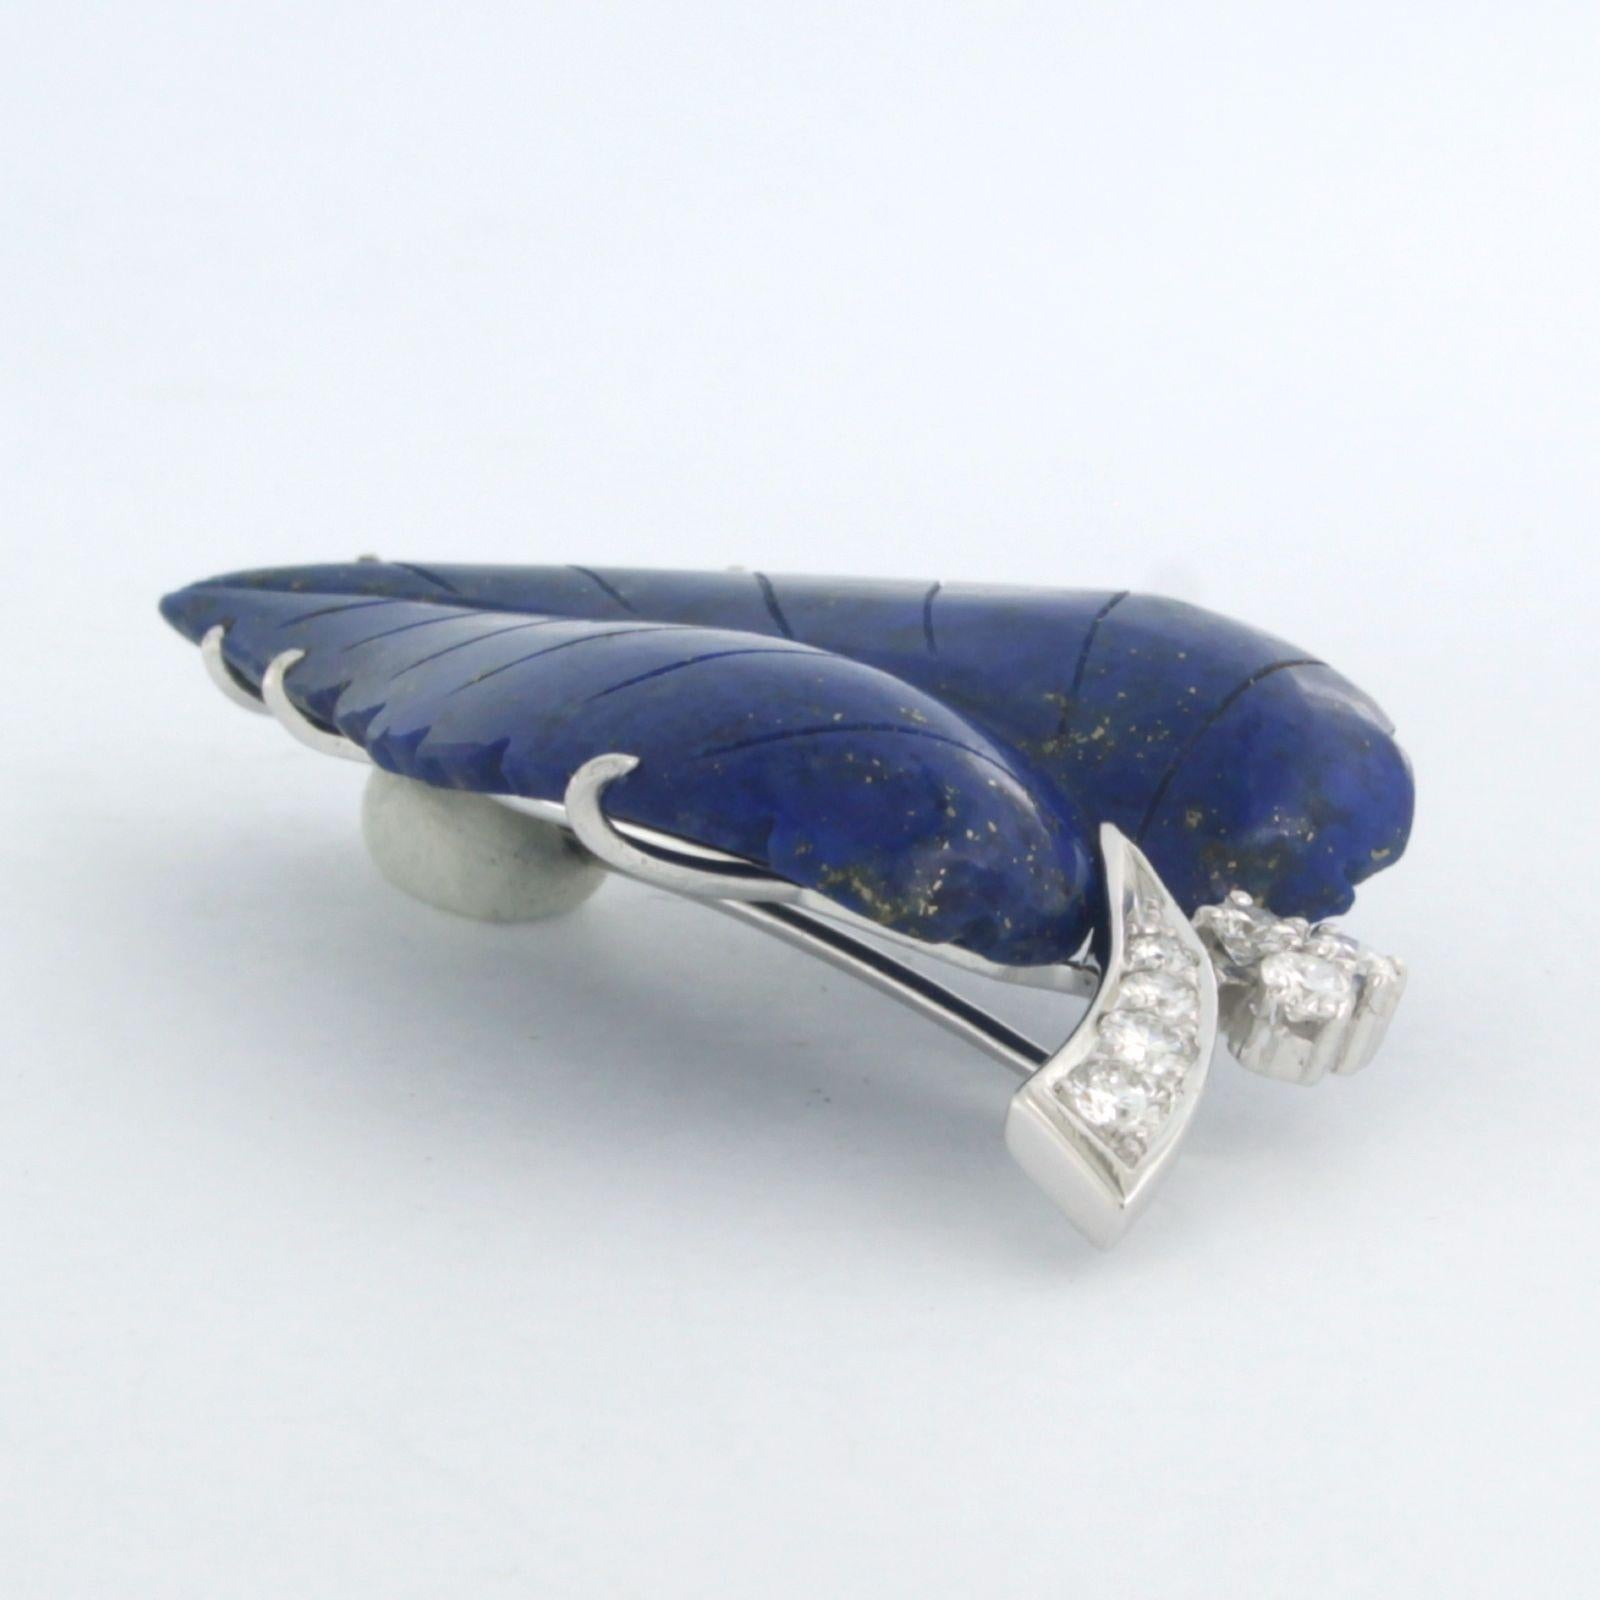 Brooch Lapis Lazuli leaf shape set with Diamonds, 18k white gold In Good Condition For Sale In The Hague, ZH